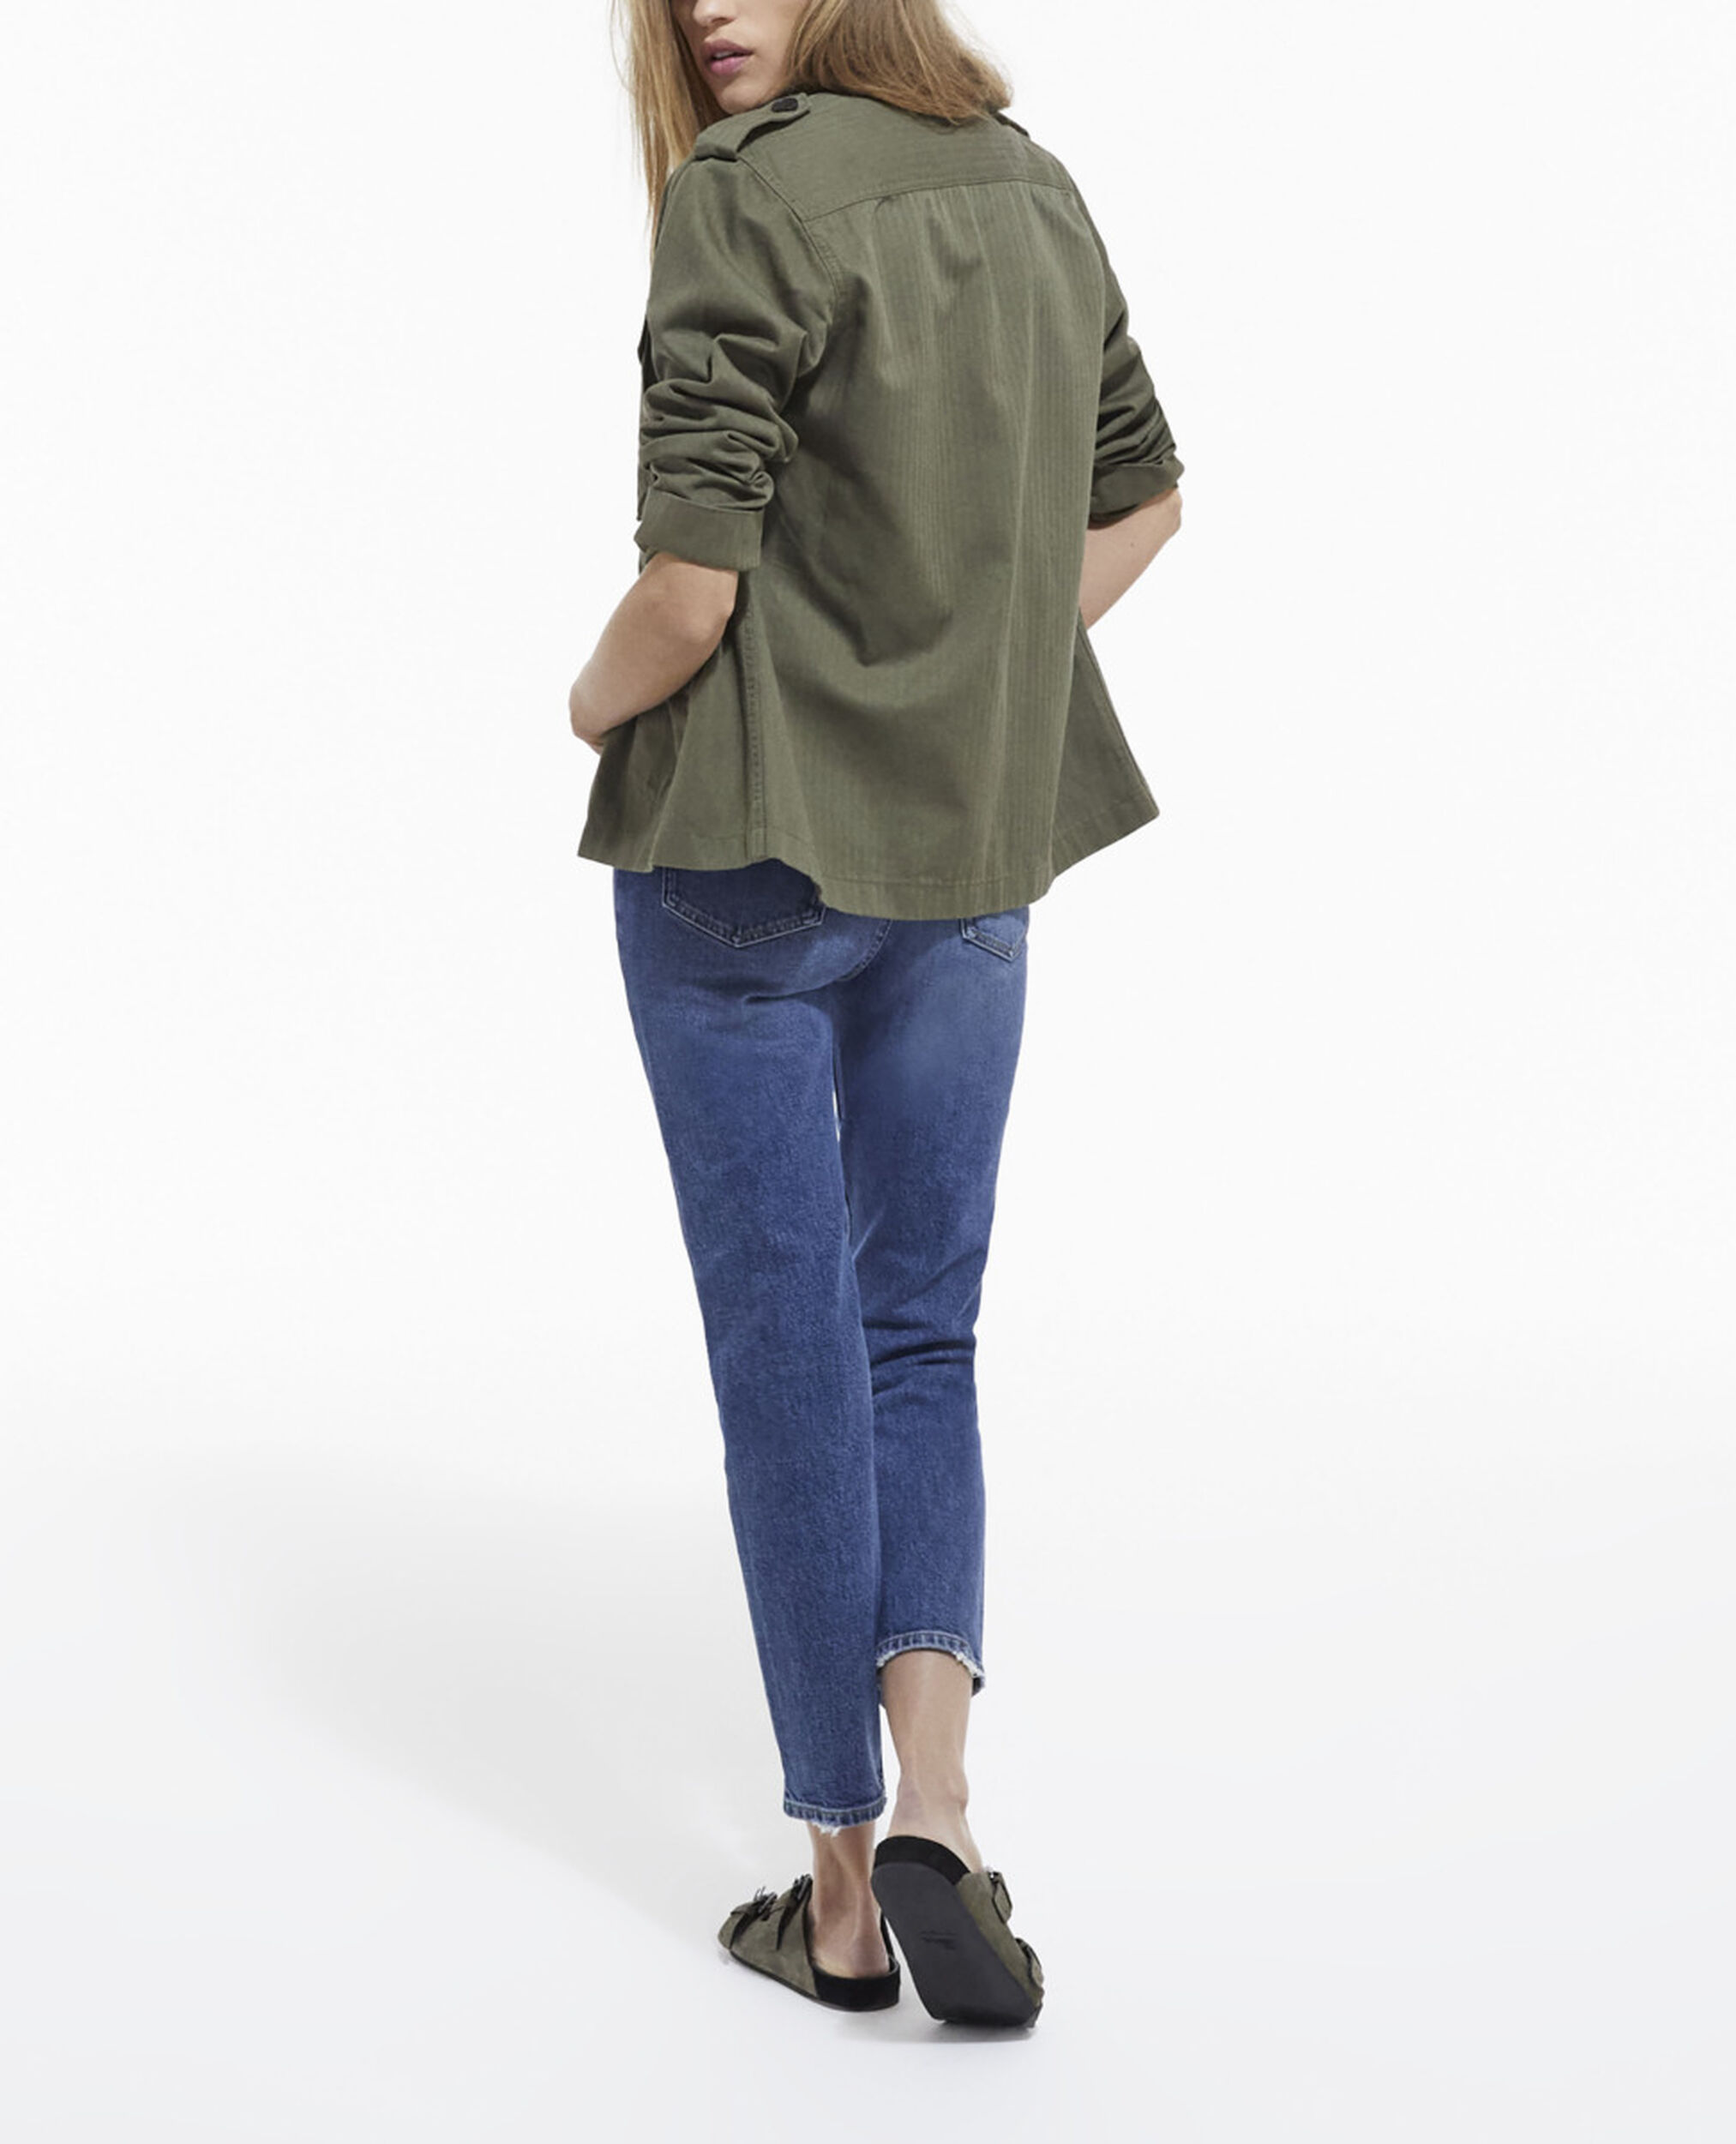 Khaki overshirt with leopard print lining, OLIVE NIGHT, hi-res image number null